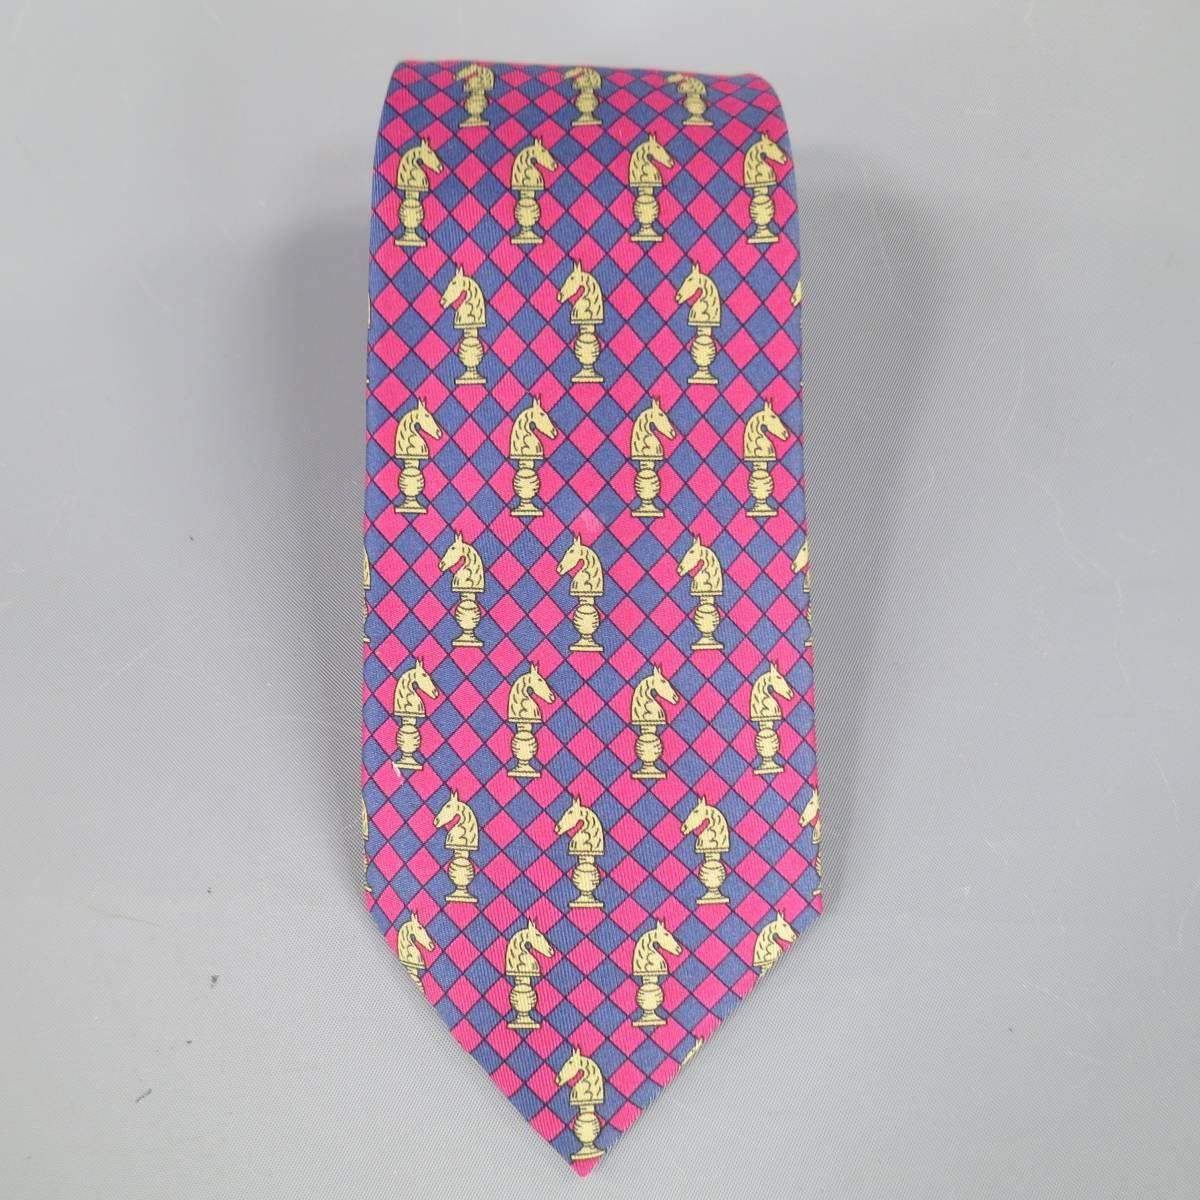 Horseshoe: HERMES tie consists of pure silk and features red and green chevron graphic with interwoven horse shoe detail, in navy,made in Italy.
 
Excellent Pre-Owned Condition    
Marked: 7119 FA

Knight: HERMES tie consists of 100% silk